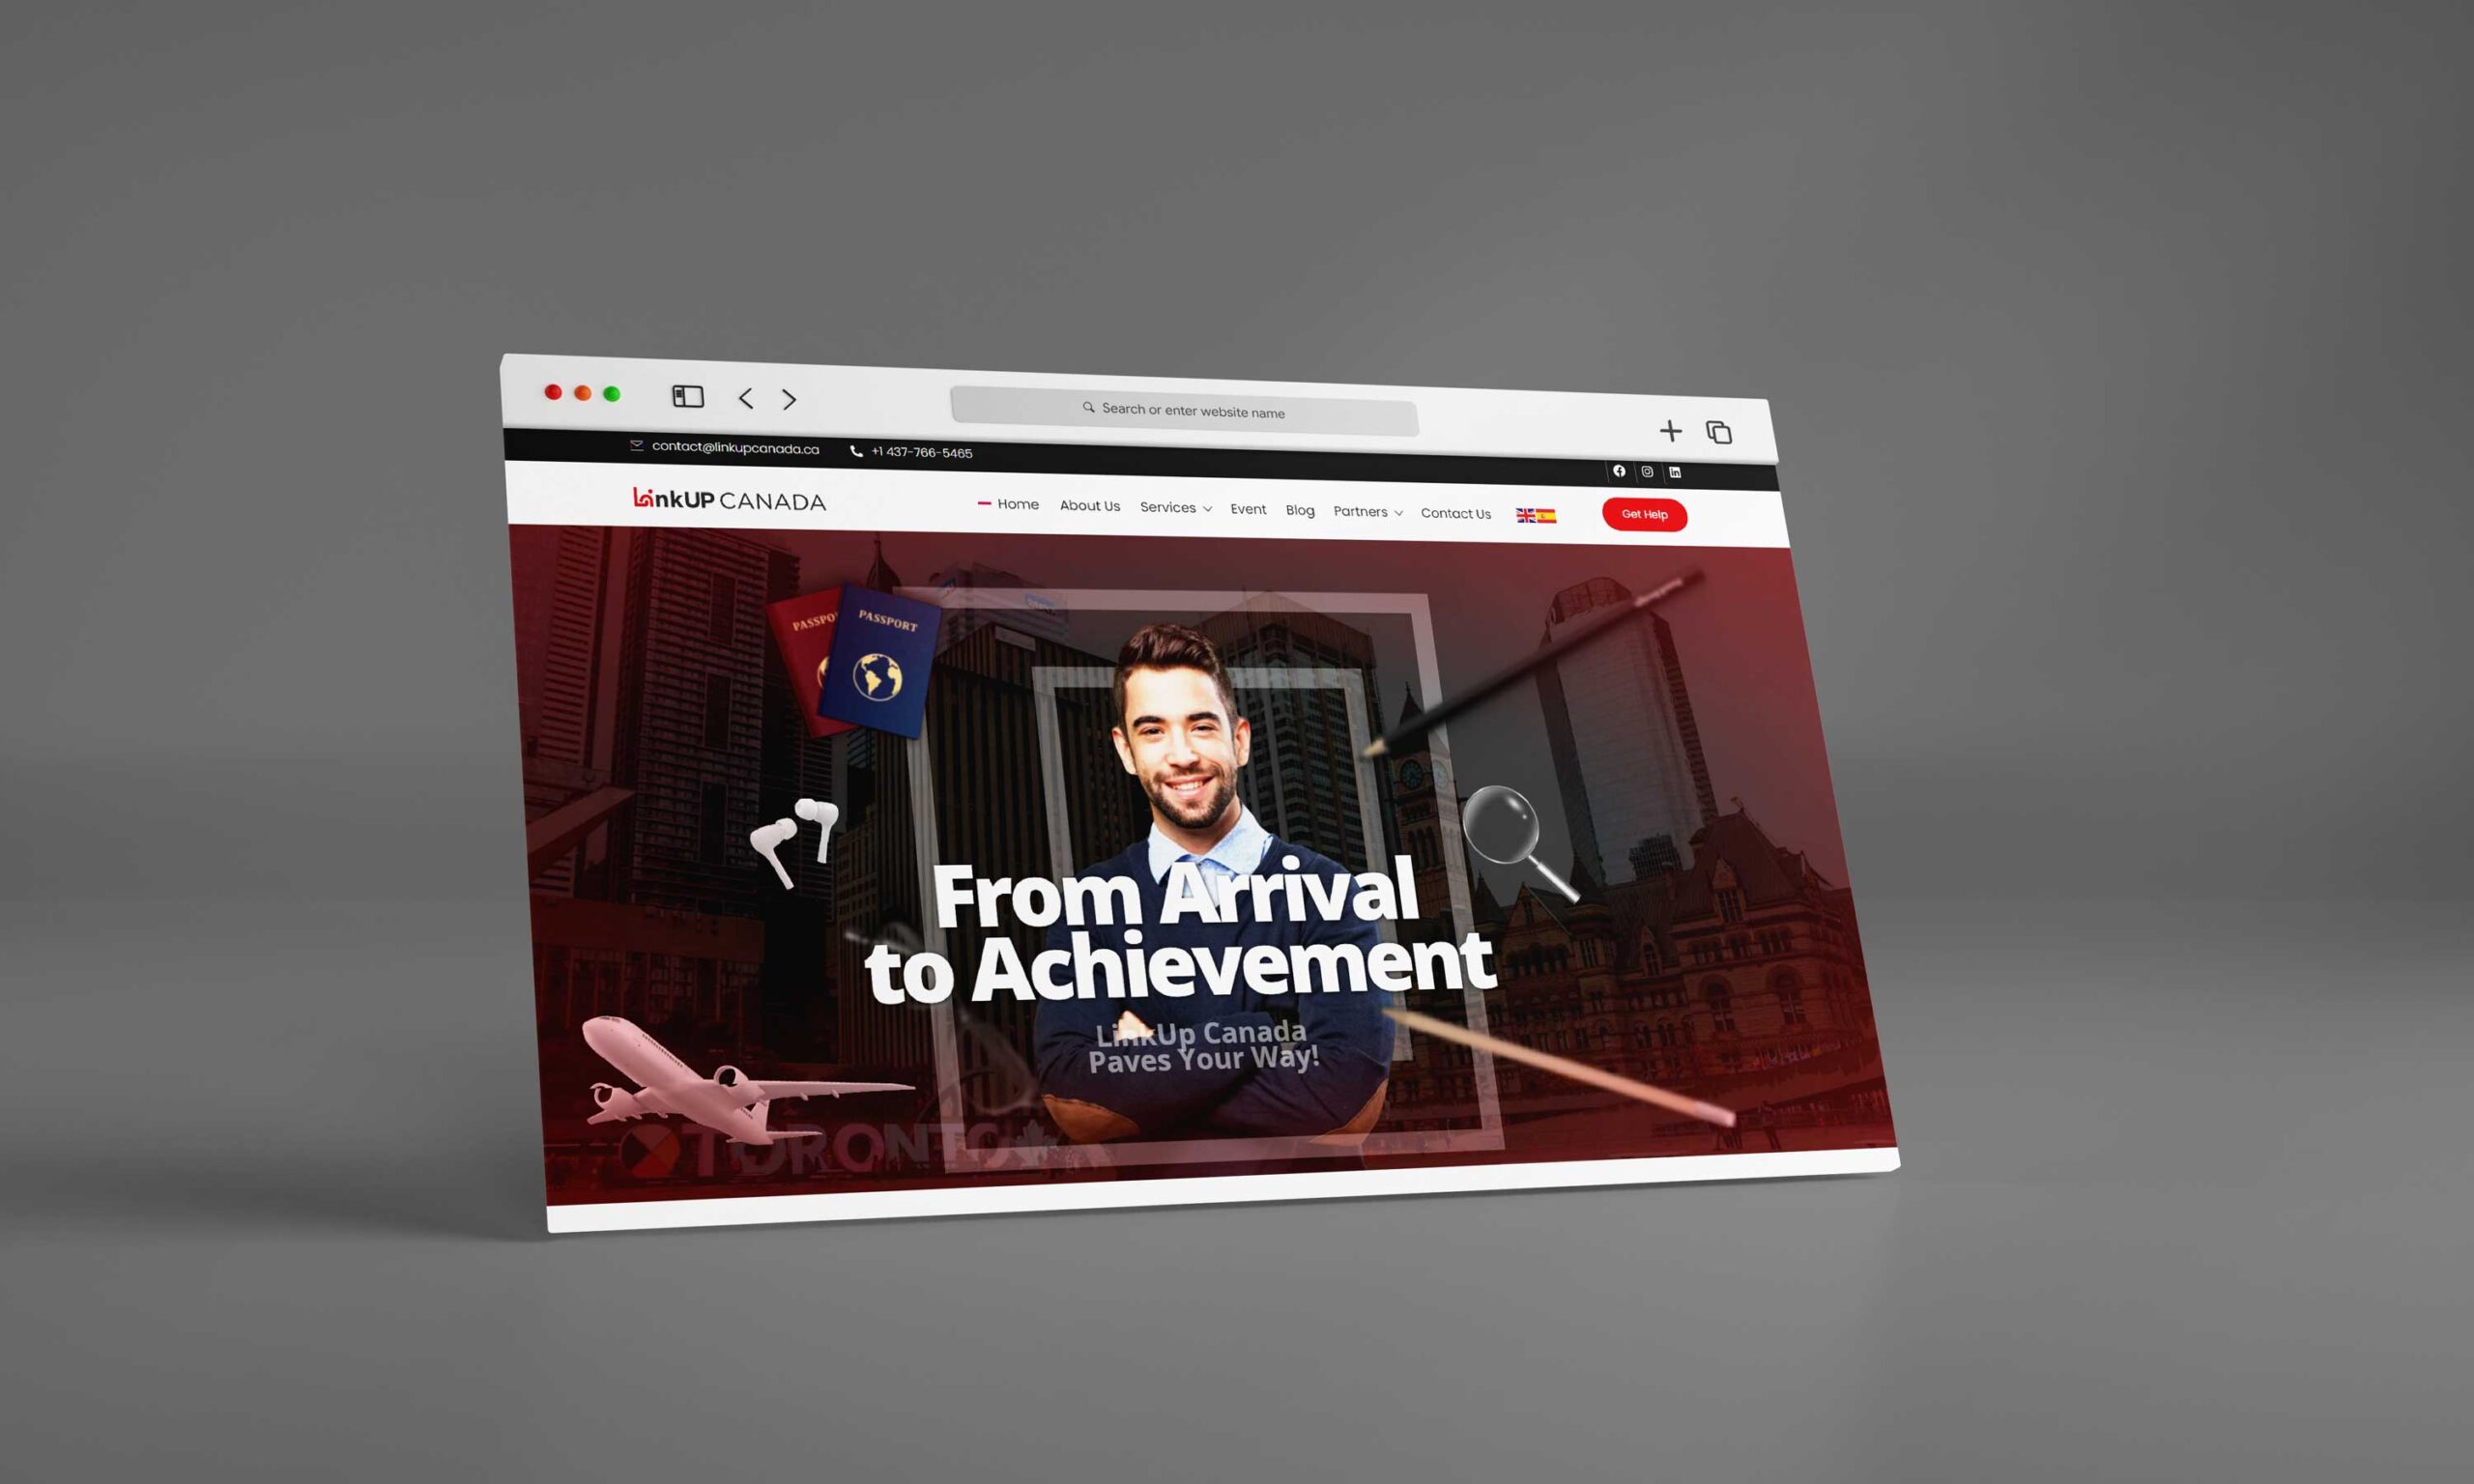 A digital mockup of a website titled "linkup canada" on a laptop screen, displaying a banner with text "from arrival to achievement" and images of a man, airplane, and urban skyline.